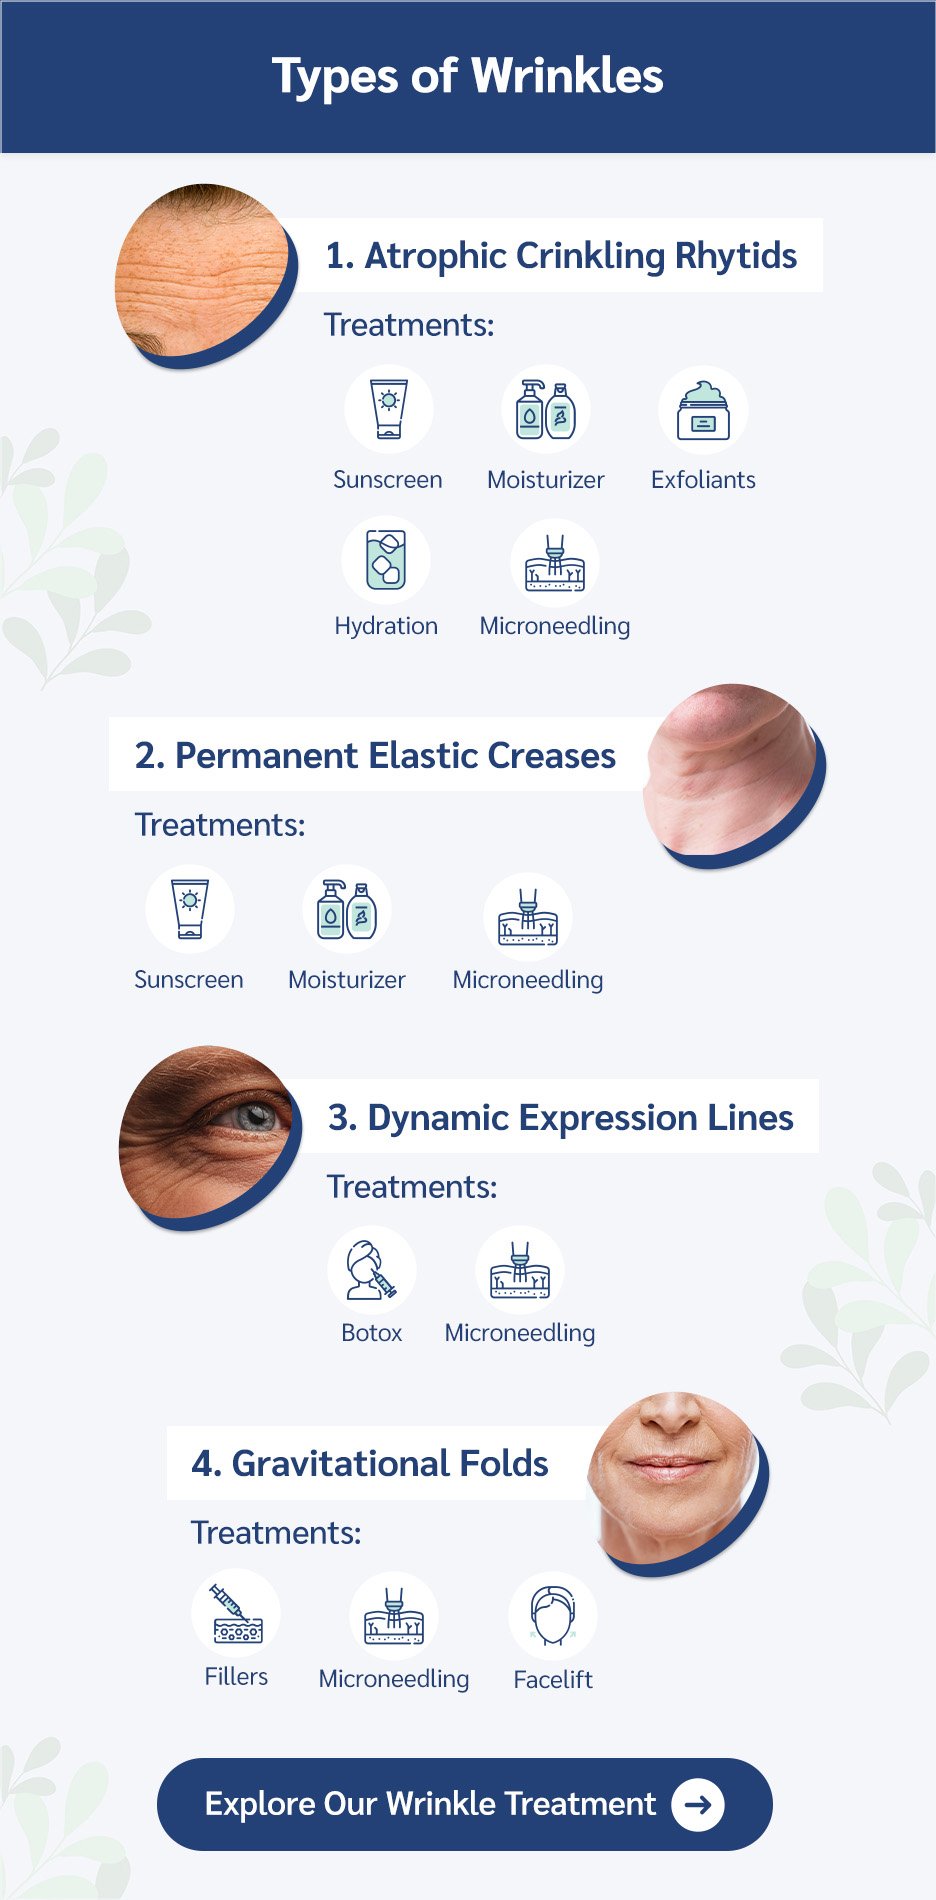 A list of the types of wrinkles